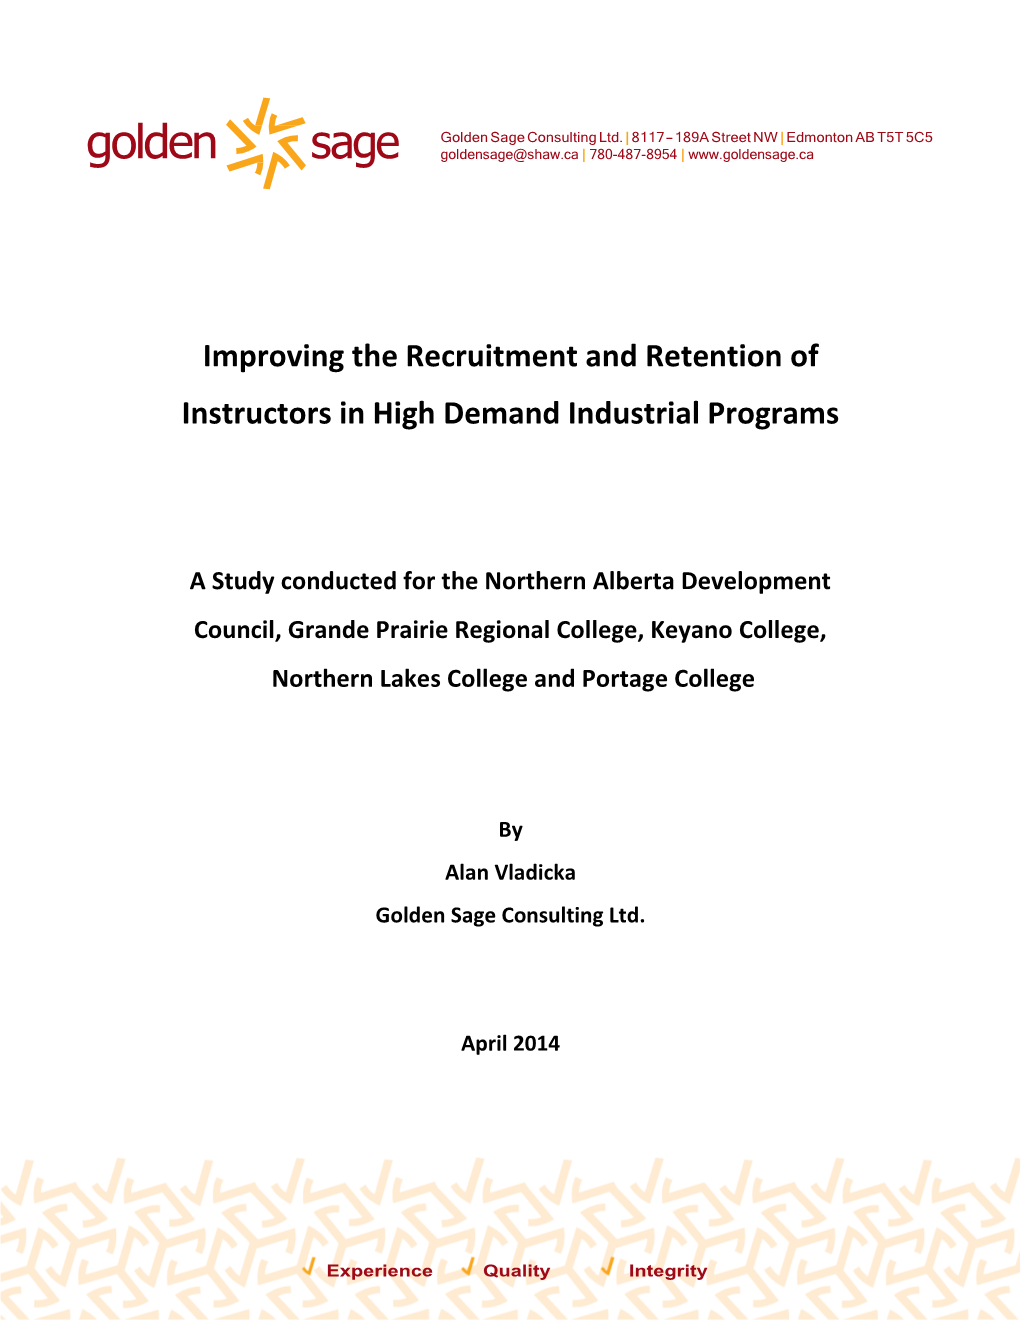 Improving the Recruitment and Retention of Instructors in High Demand Industrial Programs